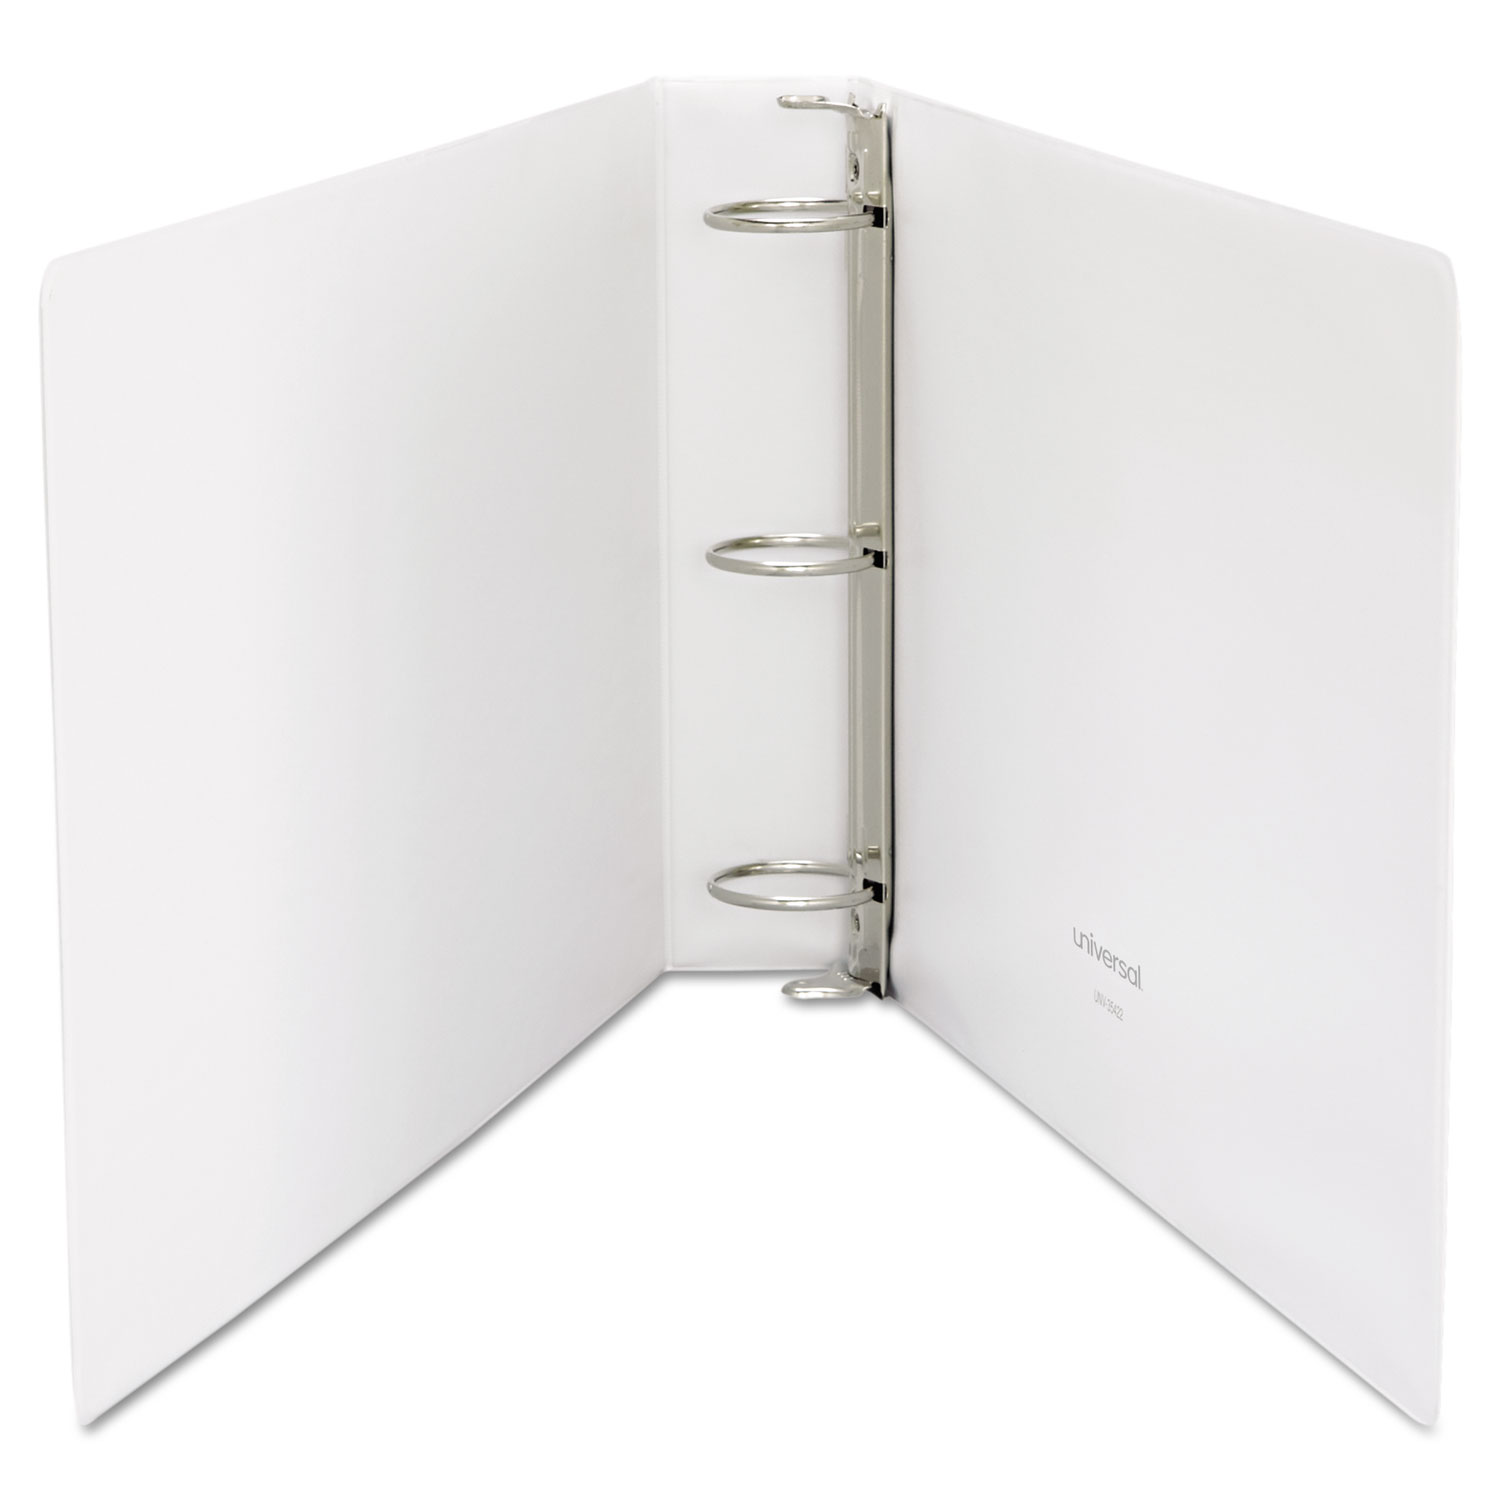 Legal-Size Round Ring Binder with Label Holder, 2 Capacity, 11 x 17, White